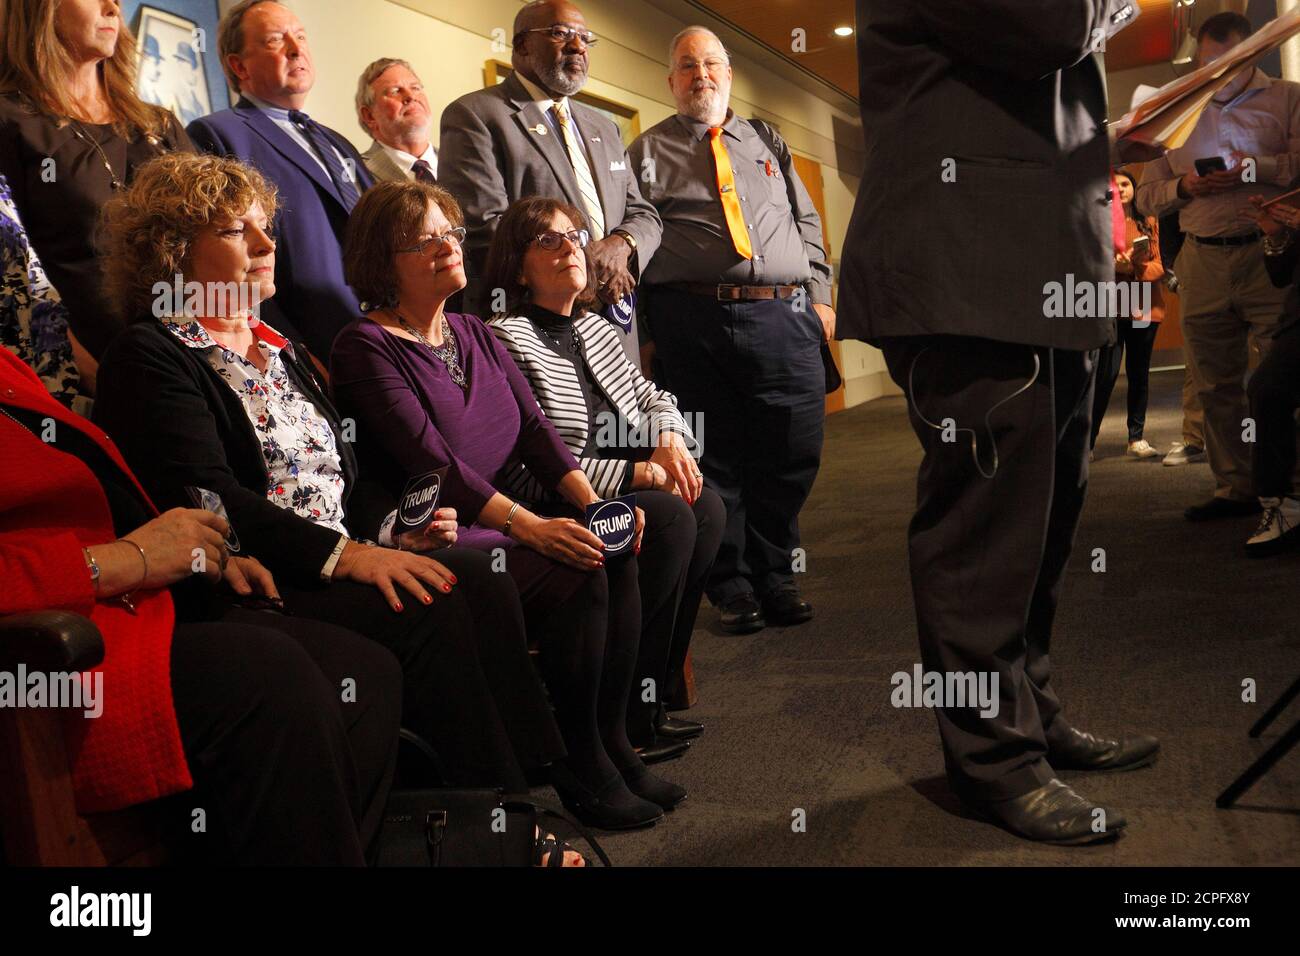 North Carolina's Electors listen as Republican Party Executive Director Dallas Woodhouse (right) speaks to the media after he helped gather them for a group photo before they rehearsed for tomorrow's electoral college vote in Raleigh, North Carolina, U.S., December 18, 2016.     REUTERS/Jonathan Drake Stock Photo